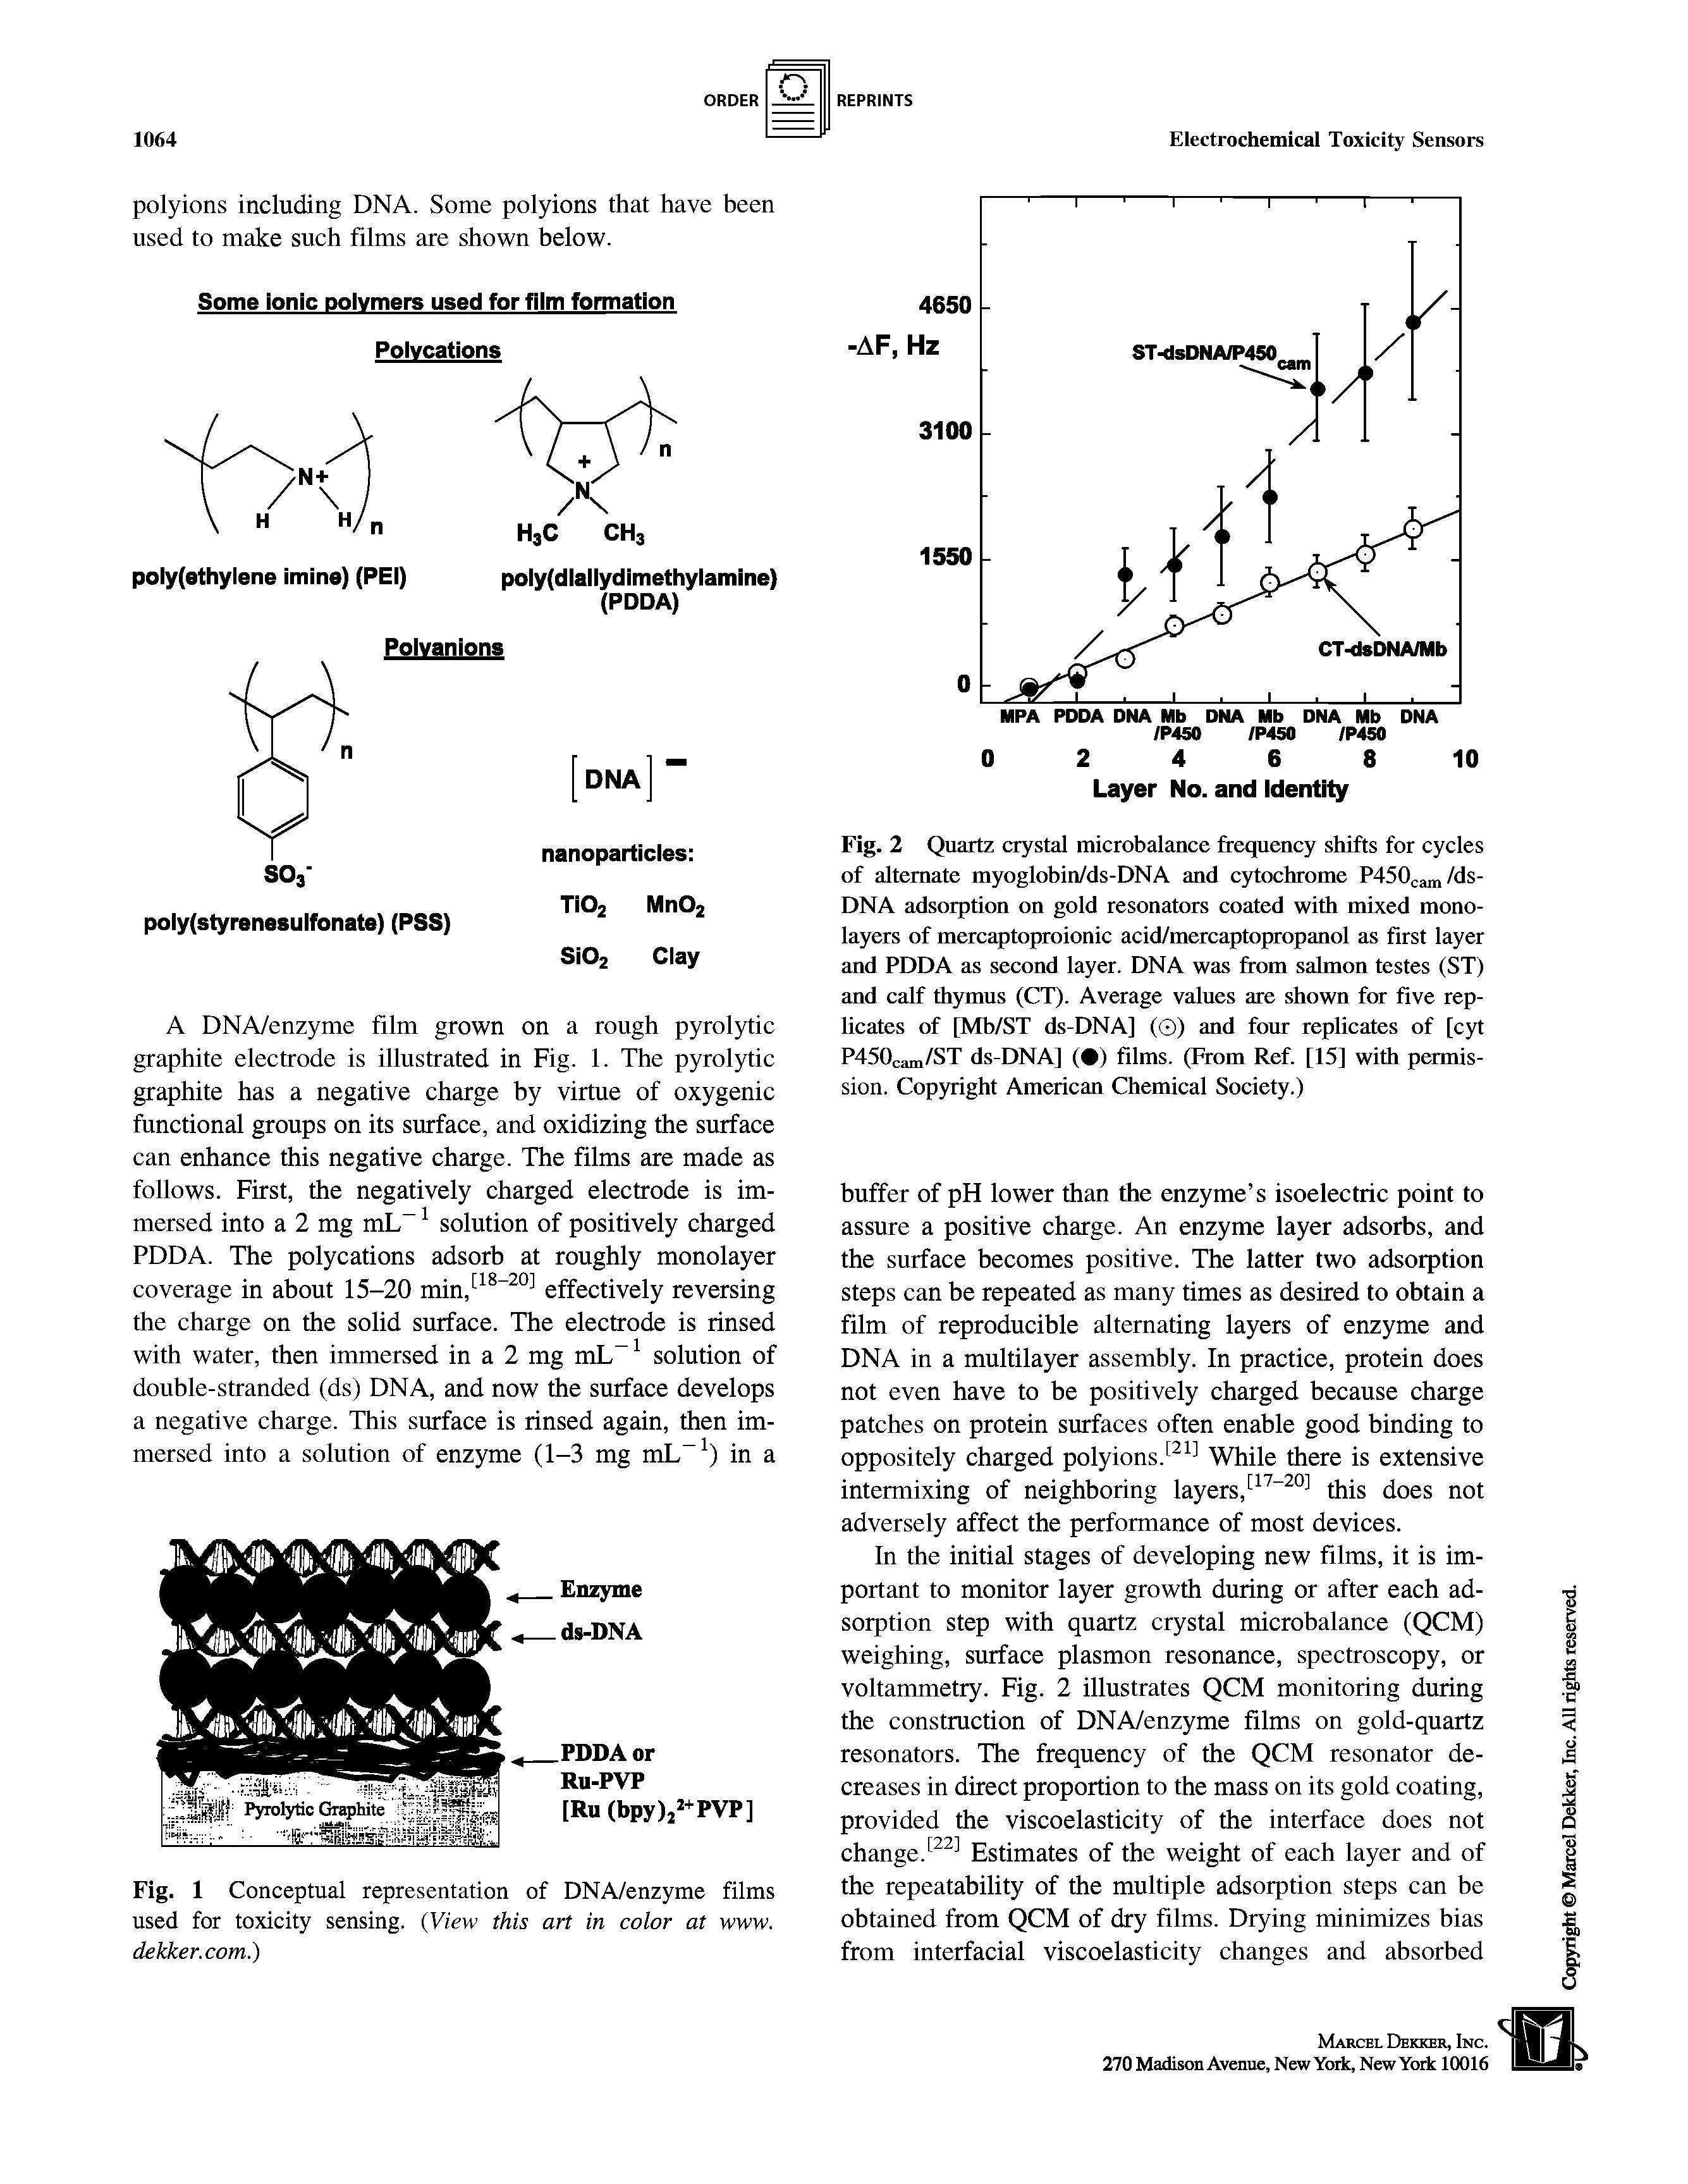 Fig. 1 Conceptual representation of DNA/enzyme films used for toxicity sensing. (View this art in color at www. dekker.com.)...